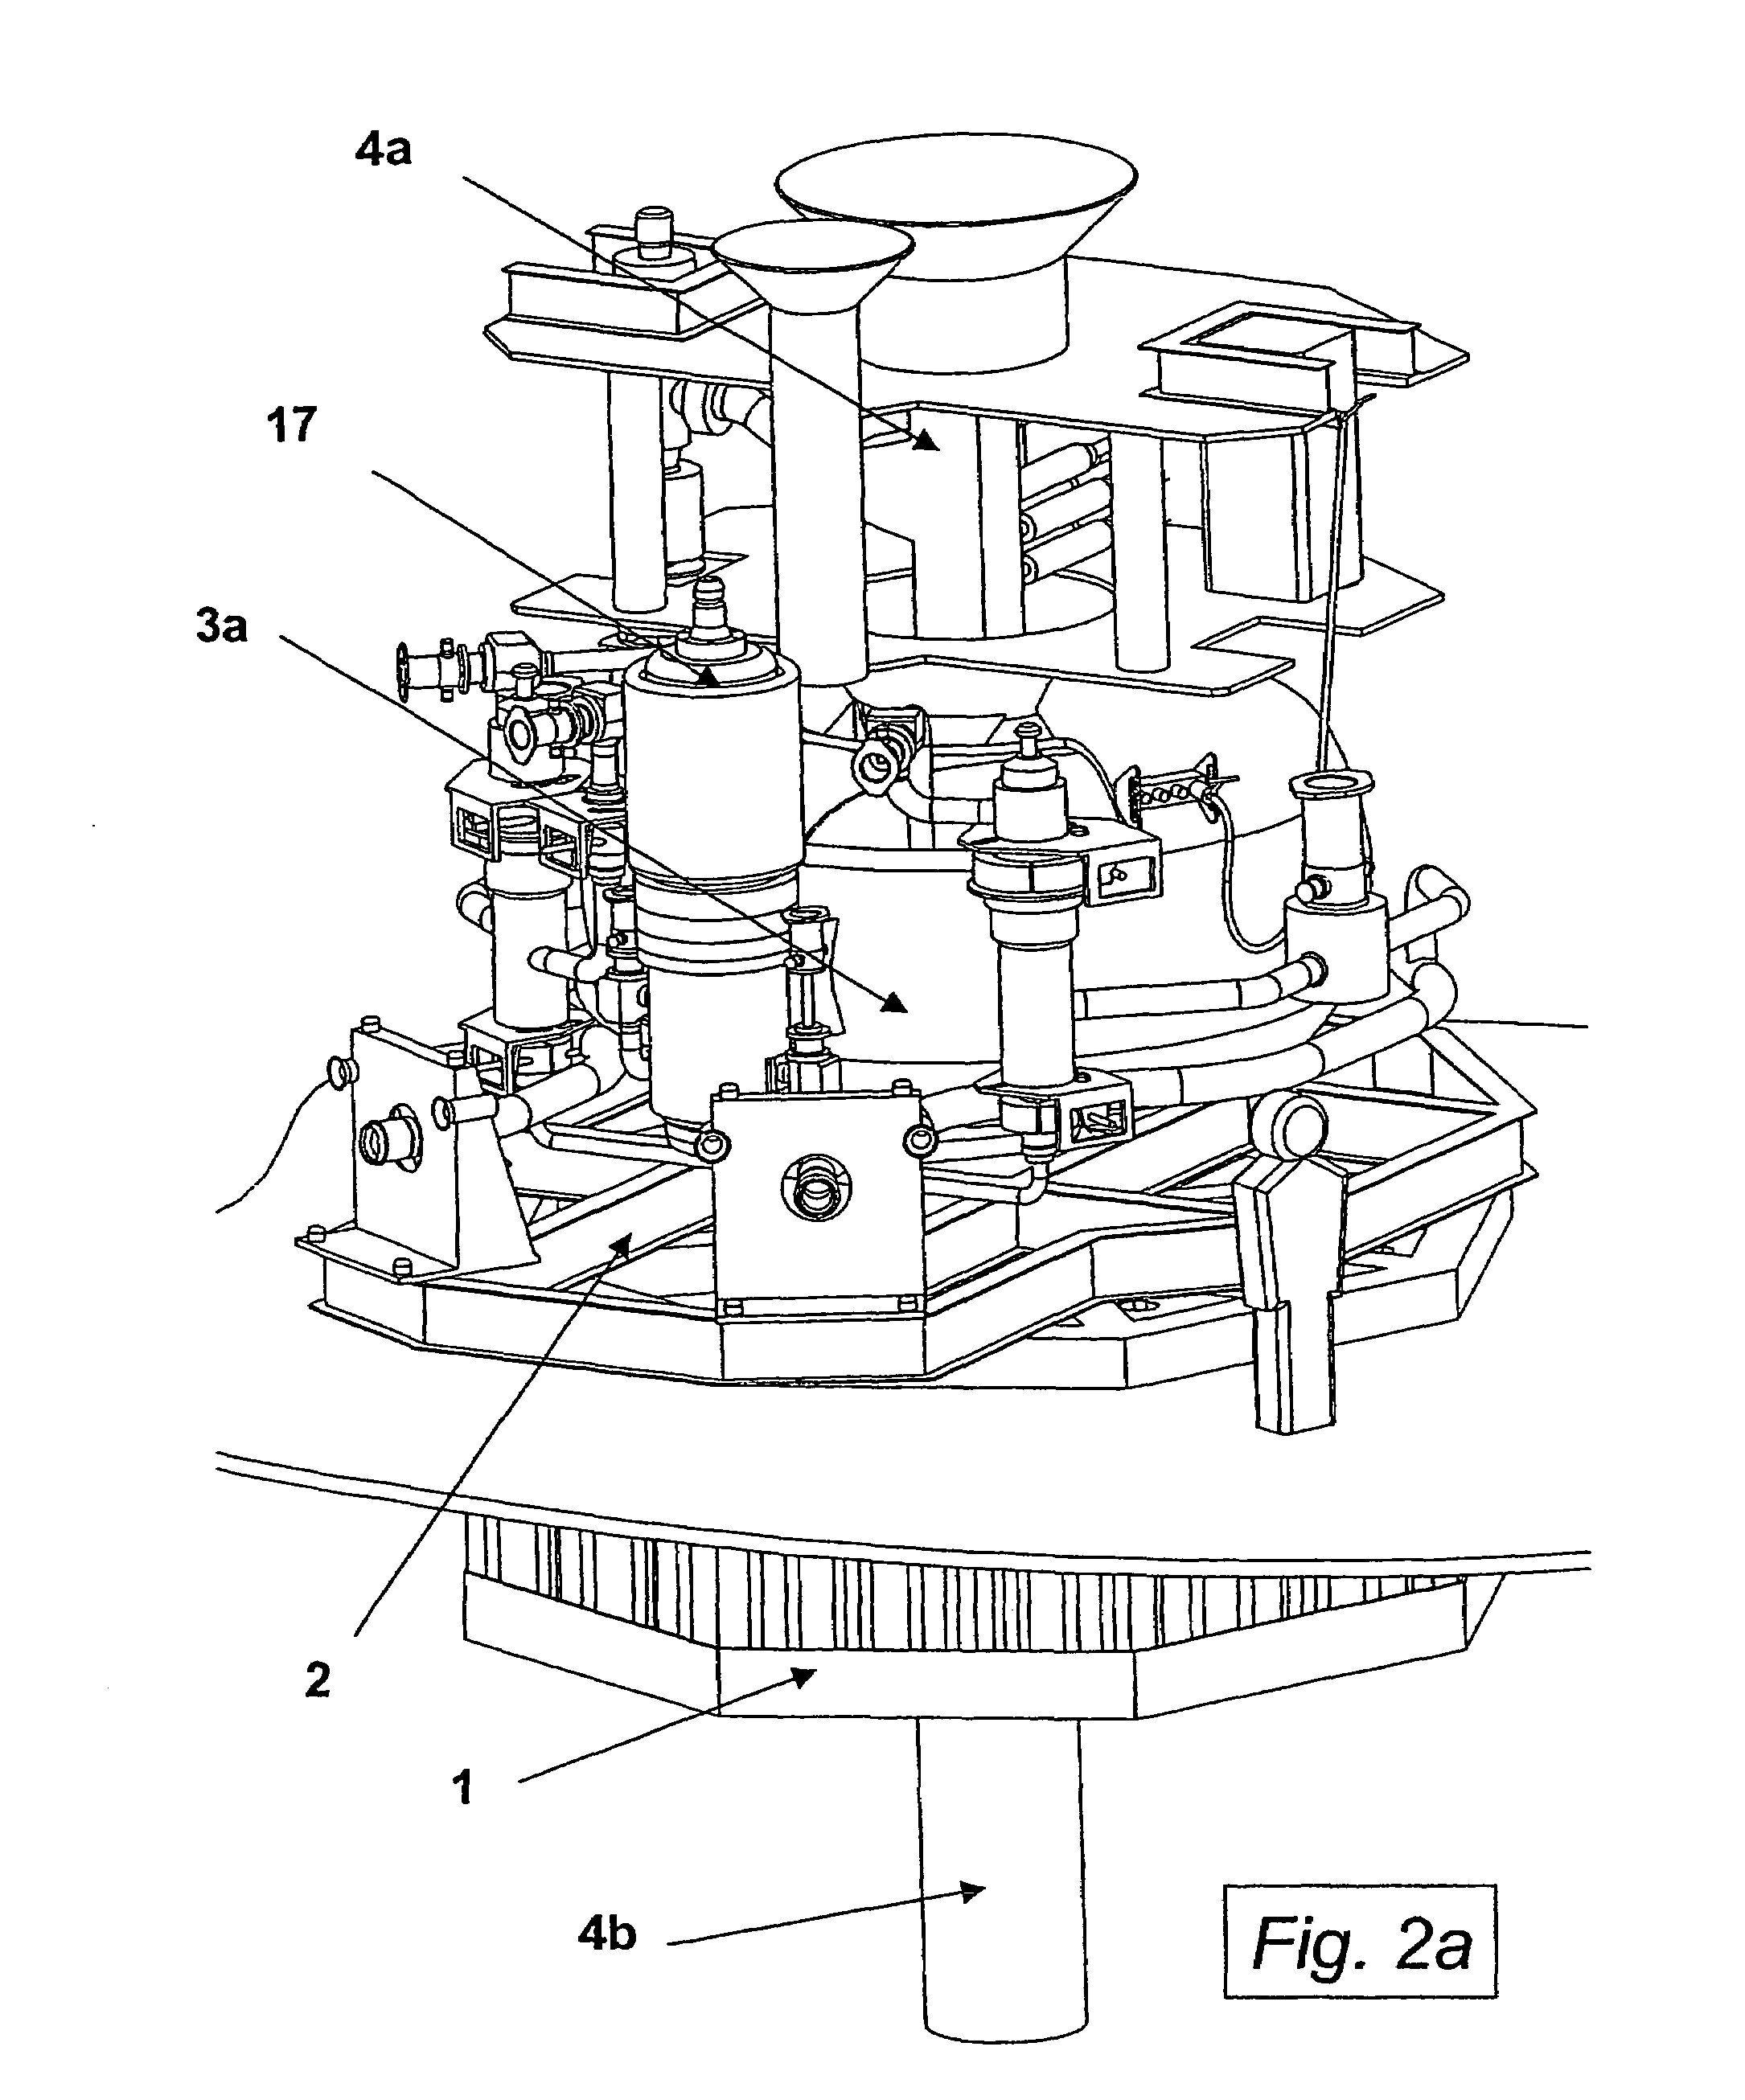 Subsea separation apparatus for treating crude oil comprising a separator module with a separator tank